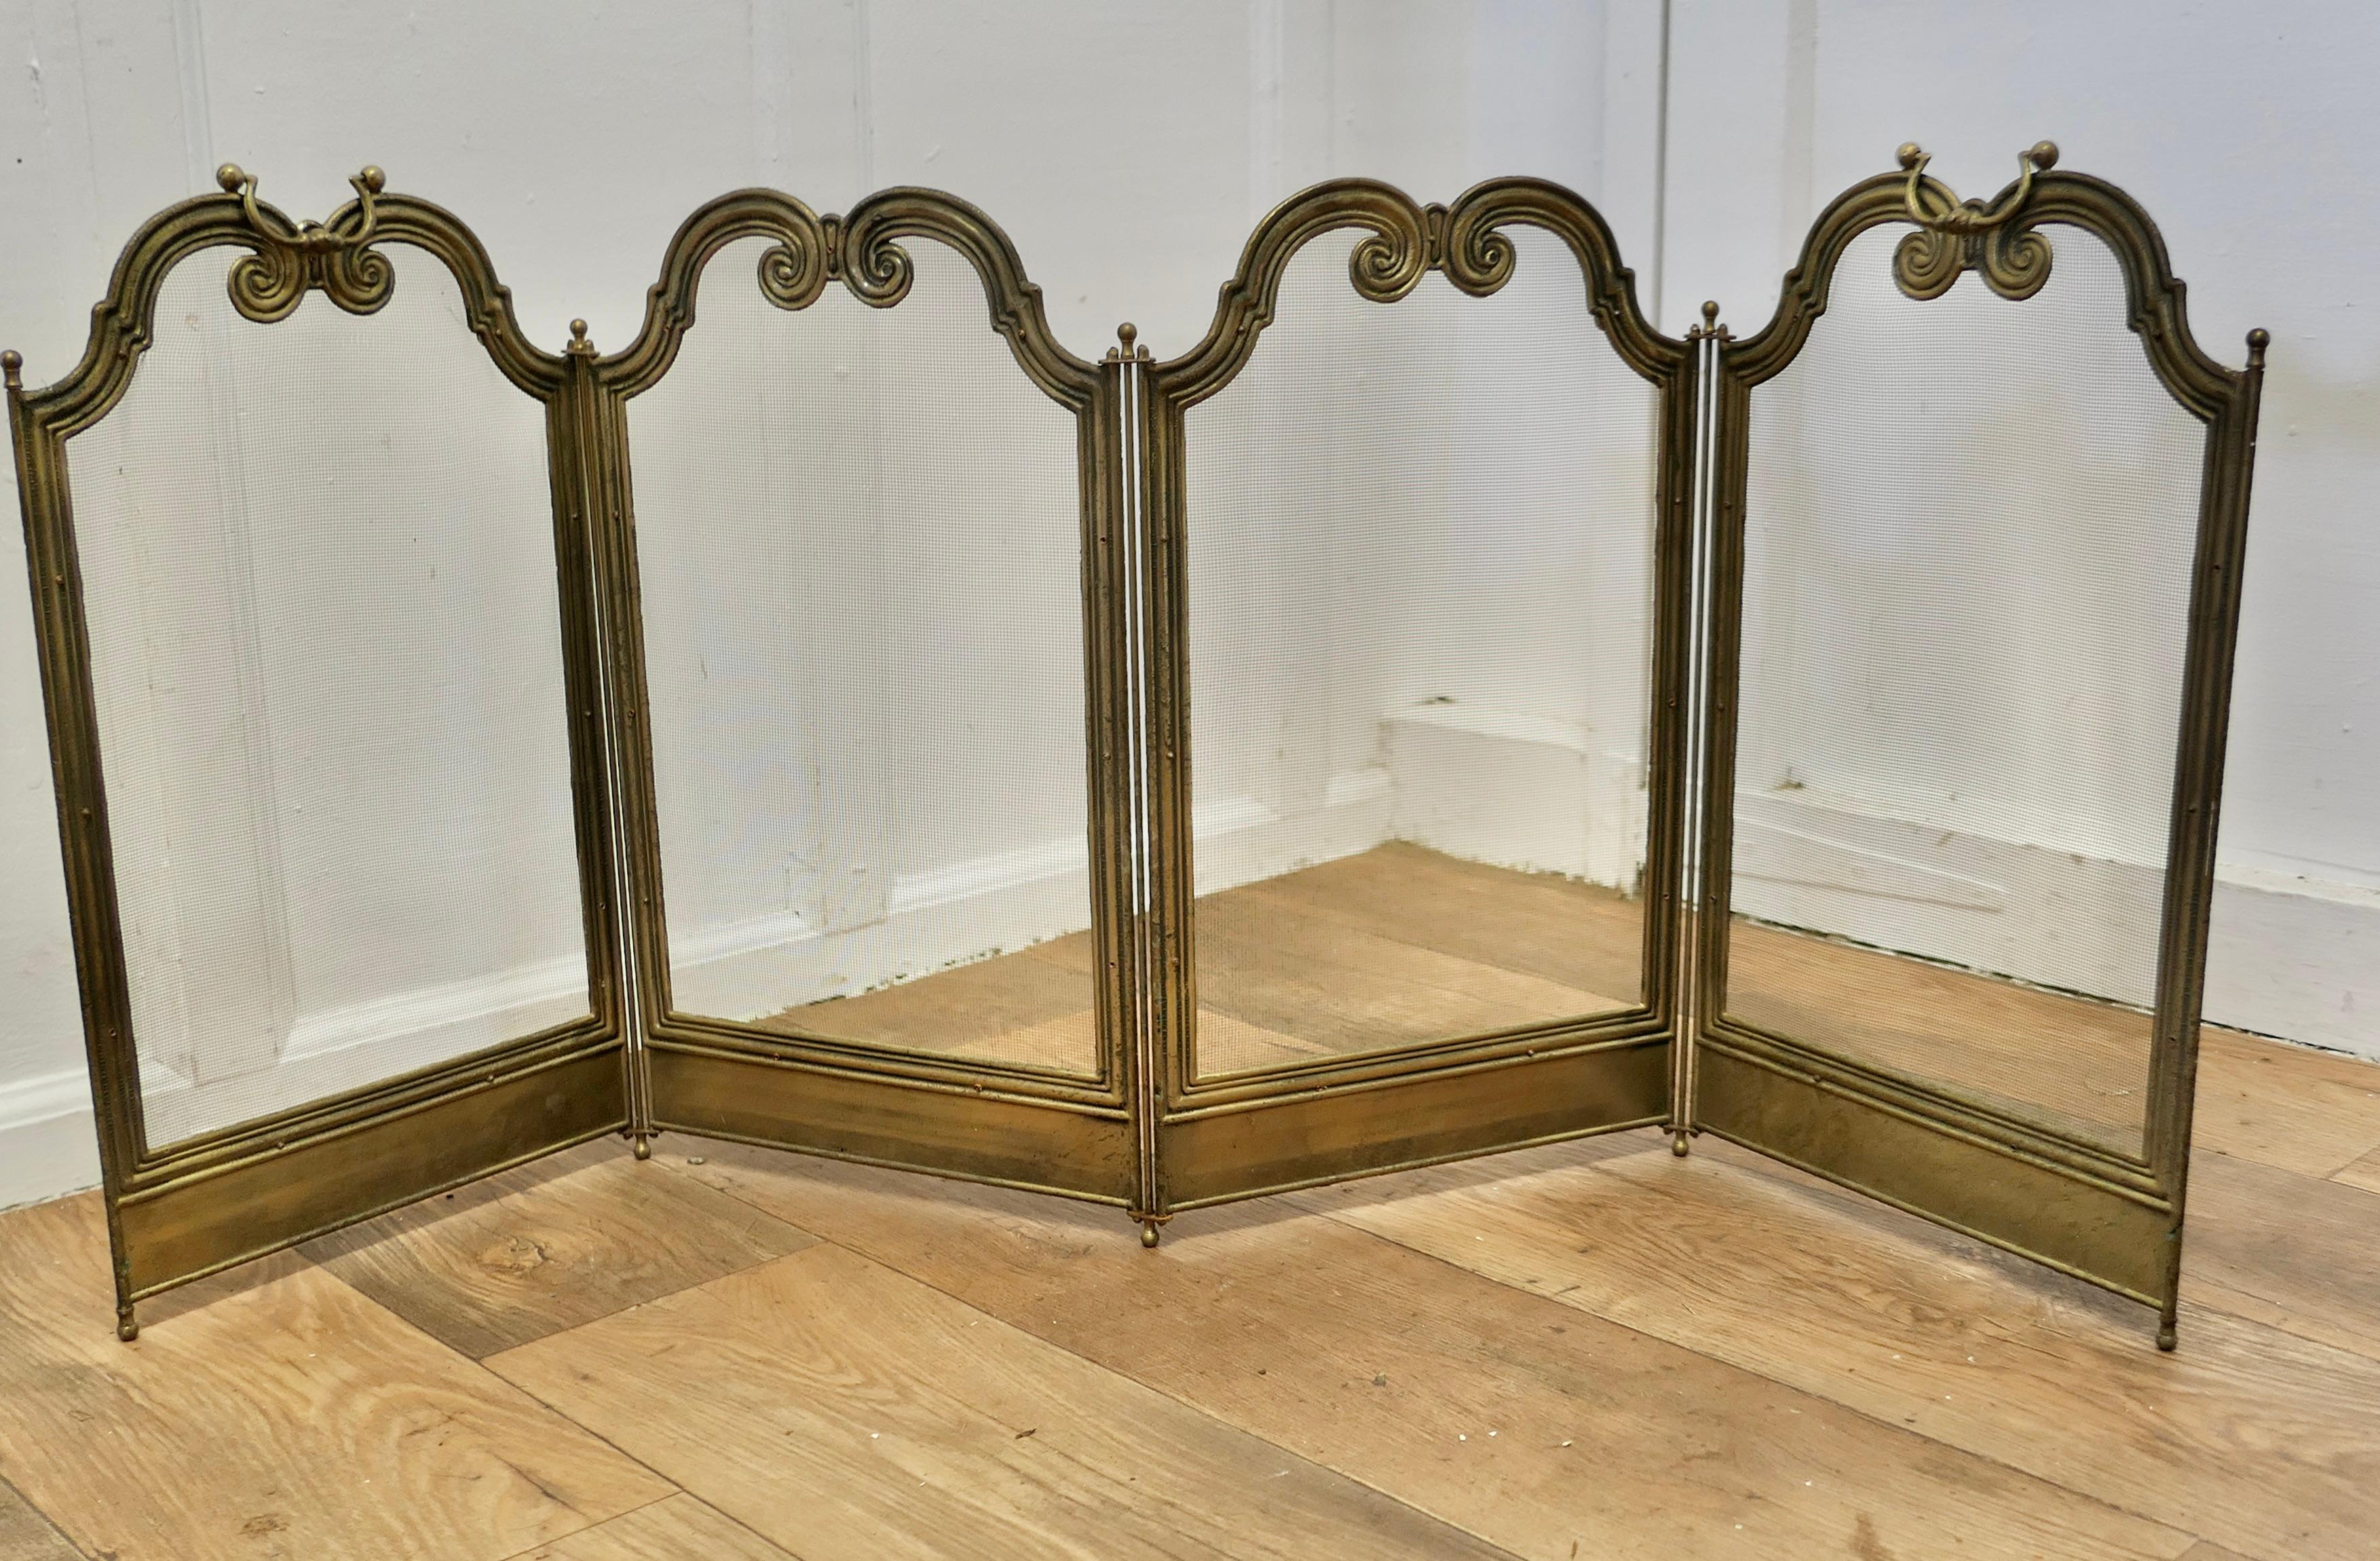 Unusual 4 Fold French Brass Fire Guard 

This is a heavy folding Fireguard, the guard is all made in Brass, both the frame and the mesh are brass, it has the added advantage that it folds flat for storage, and when opened out it can be shaped to